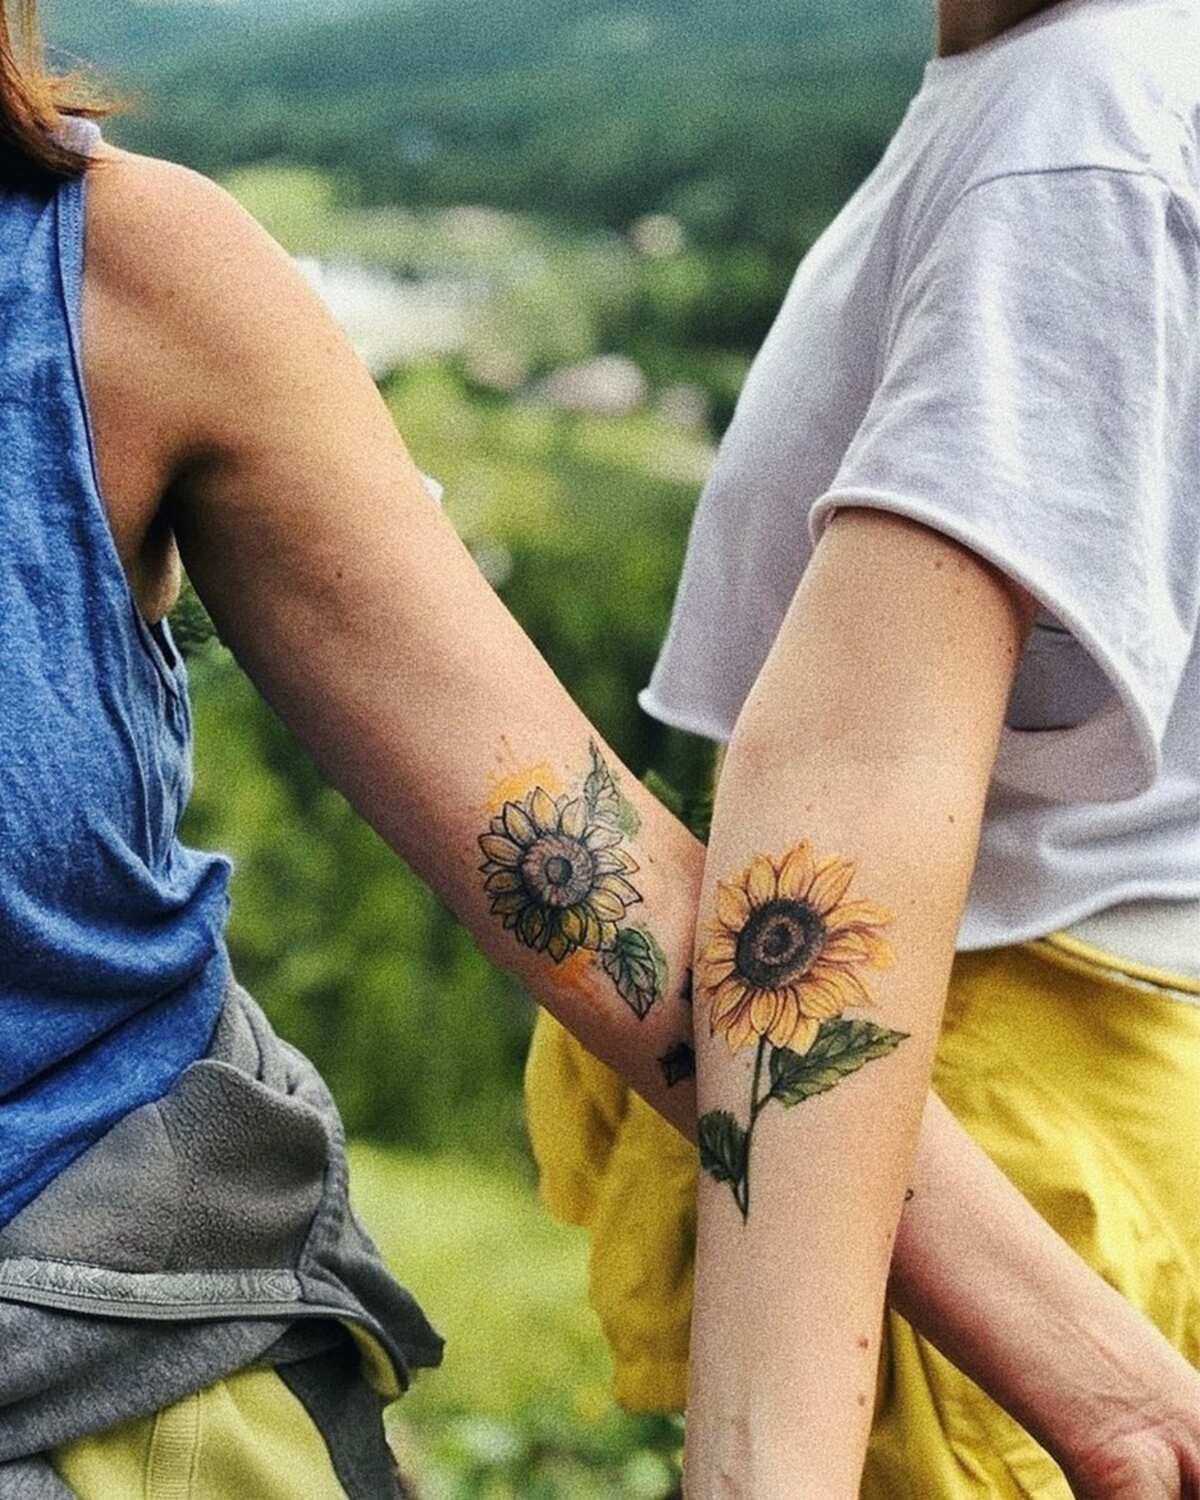 150 friendship tattoos for best friends with meaning - TattooViral.com |  Your Number One source for daily Tattoo designs, Ideas & Inspiration